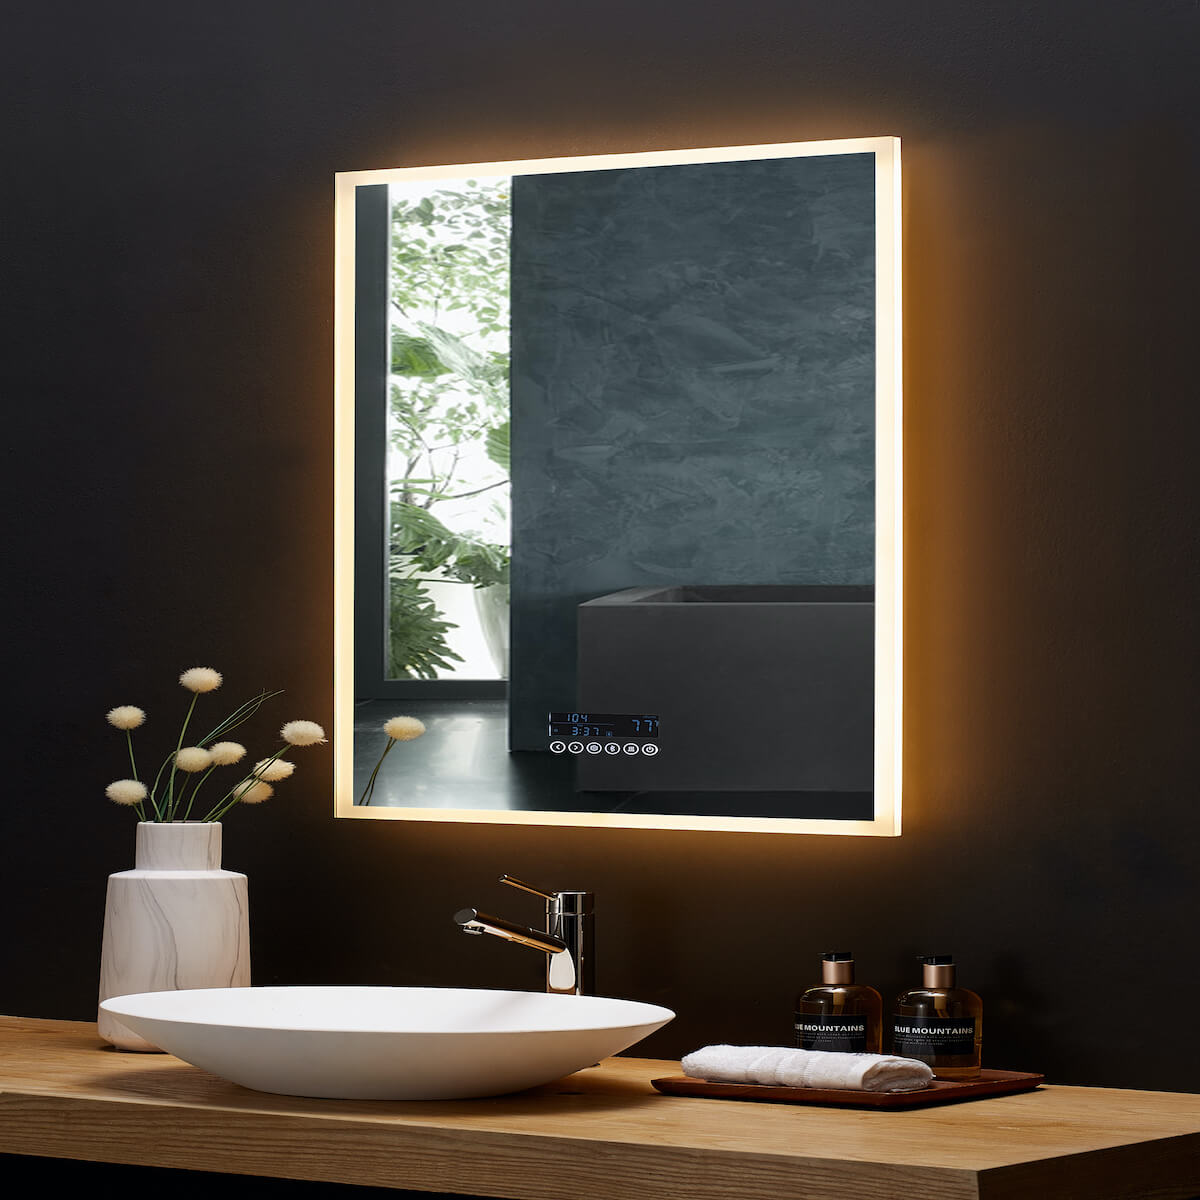 Ancerre Designs 24" LED Immersion Mirror LEDM-IMMERSION-24 Angle with Warm Light